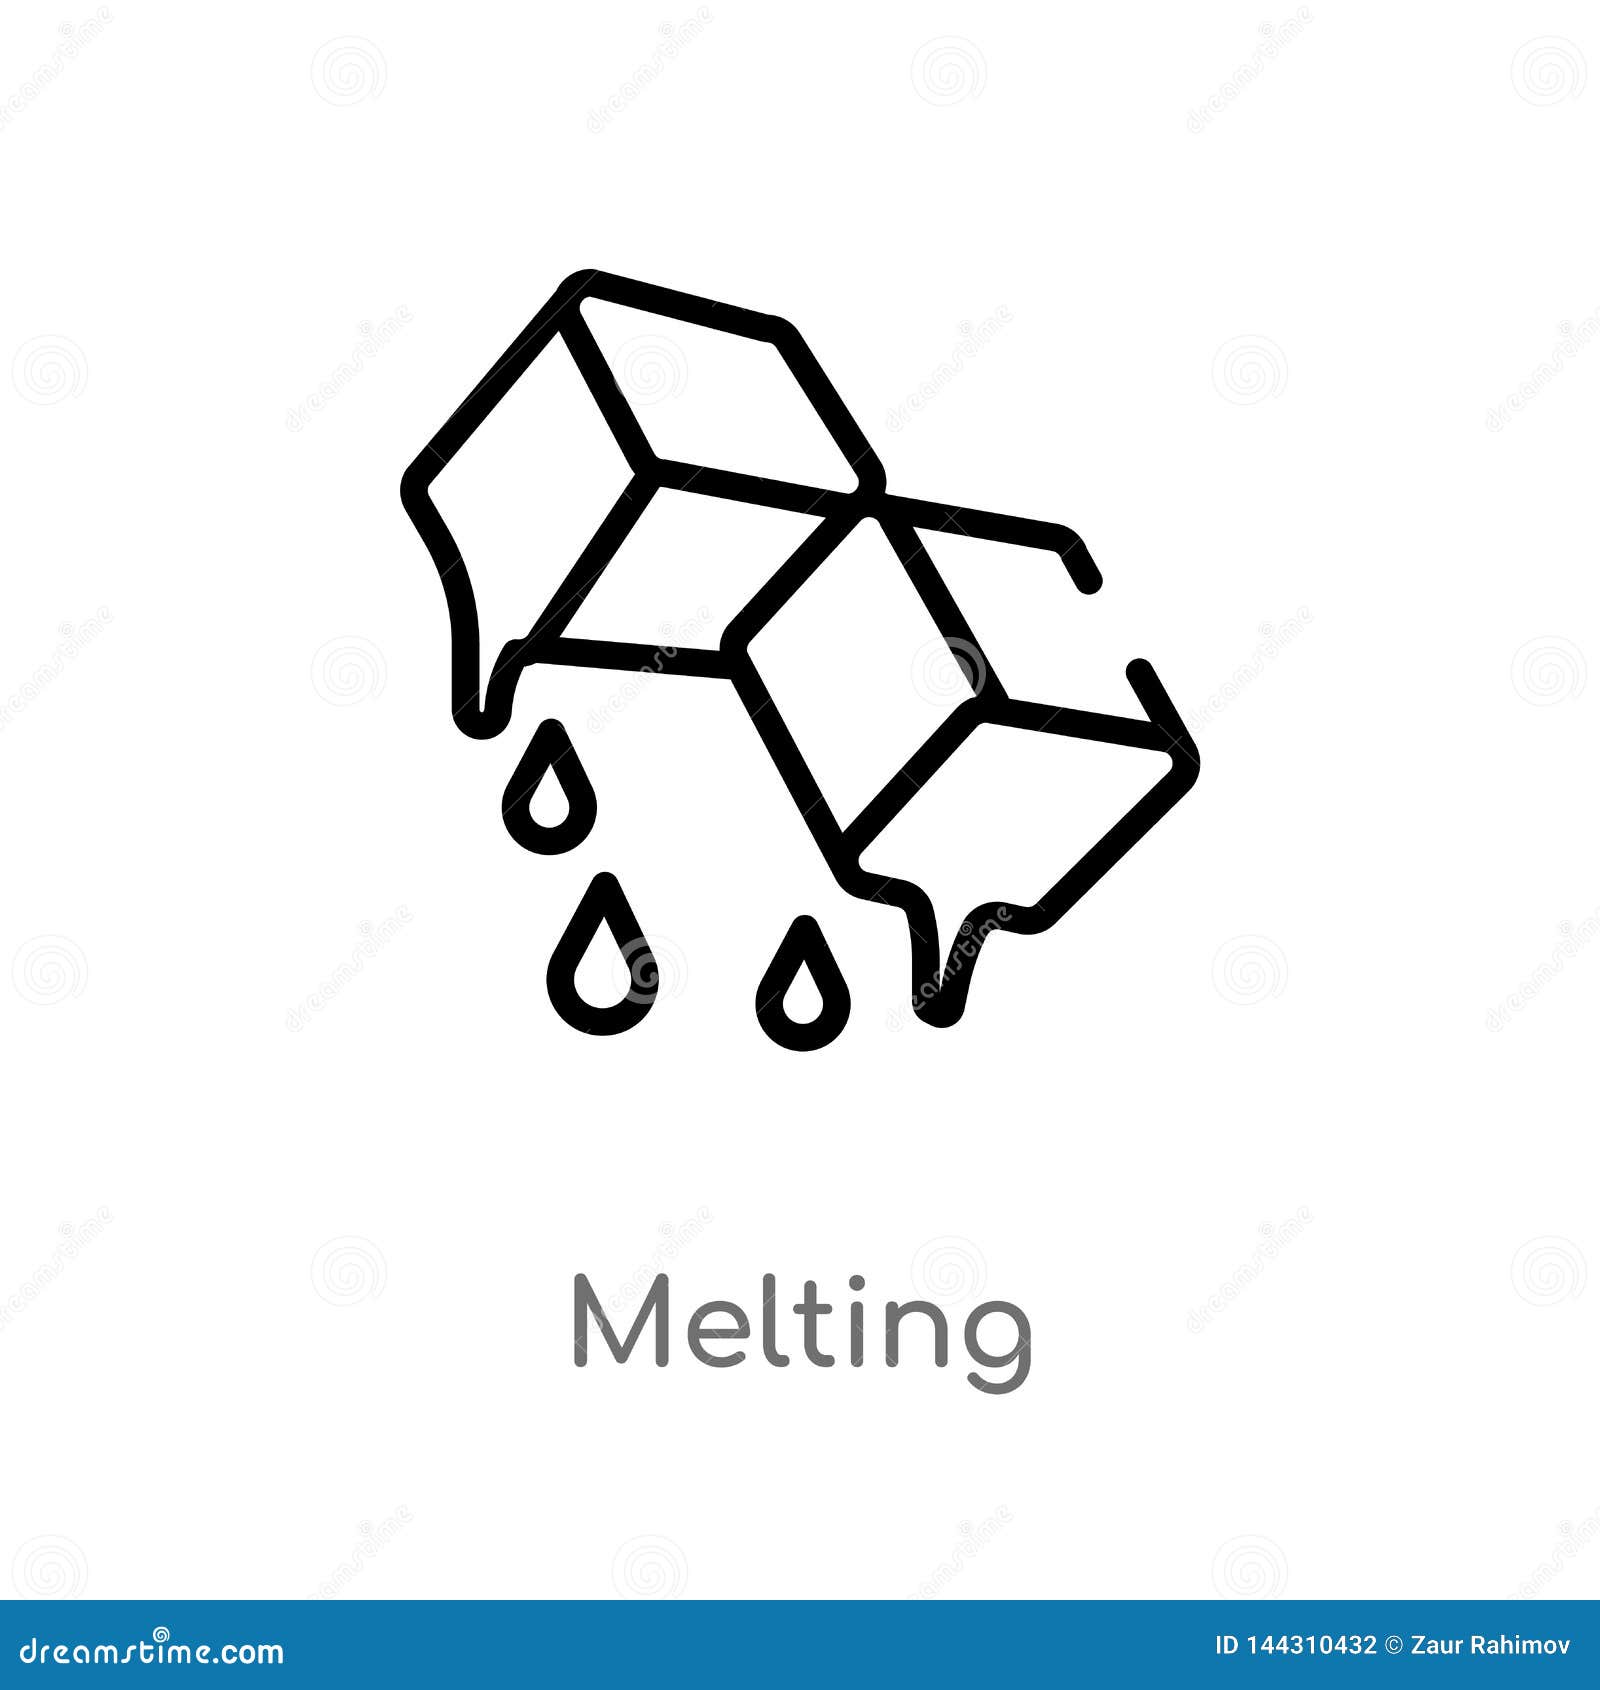 Outline Melting Vector Icon. Isolated Black Simple Line Element